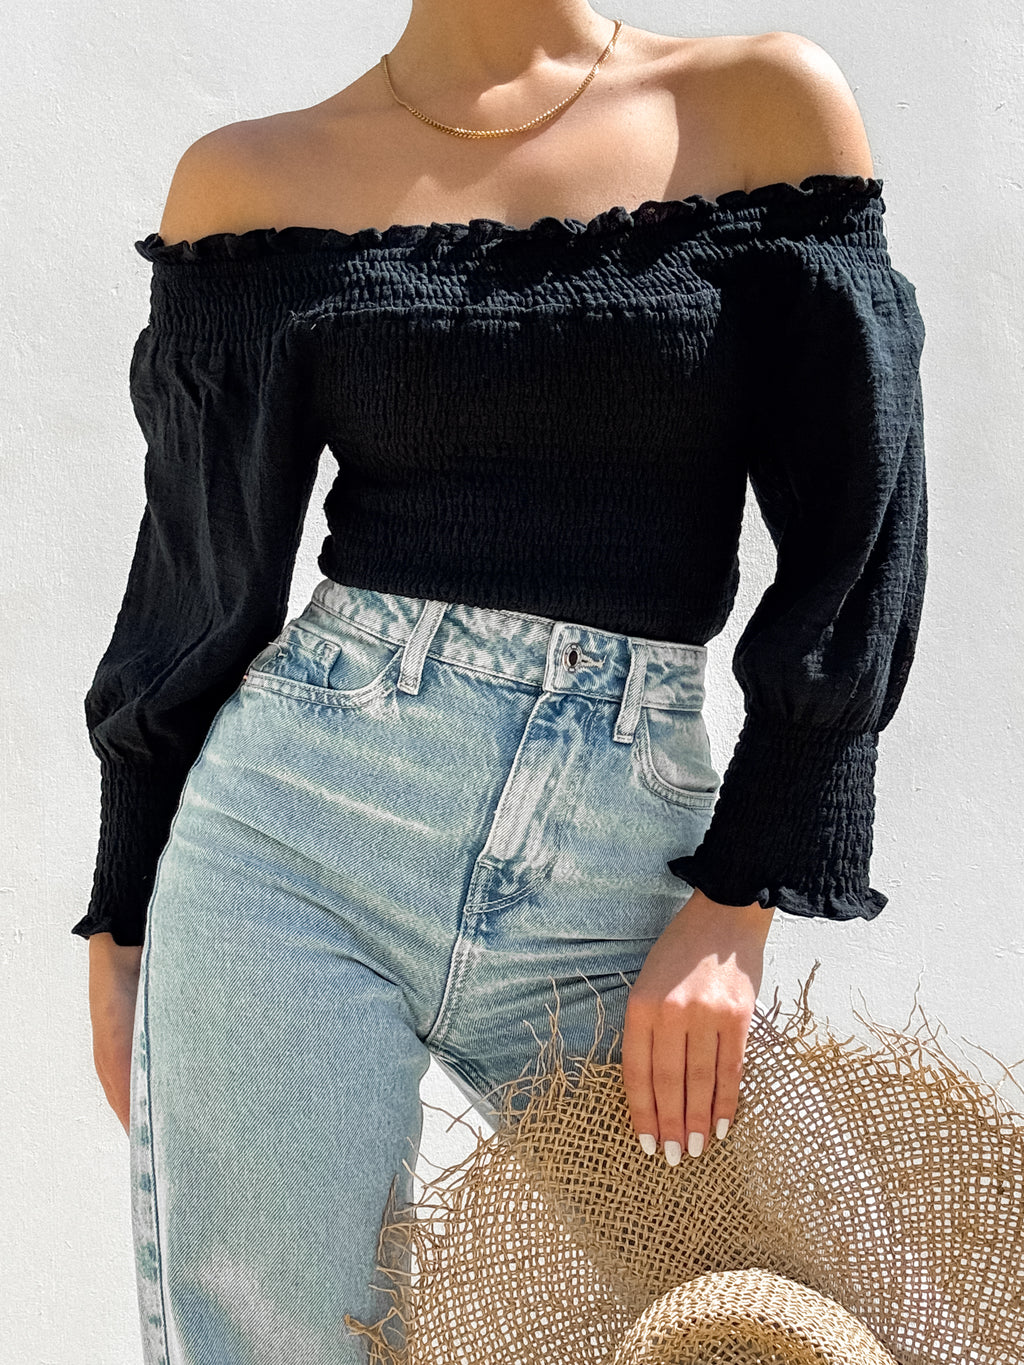 Milo Gauze Top in Black - Stitch And Feather